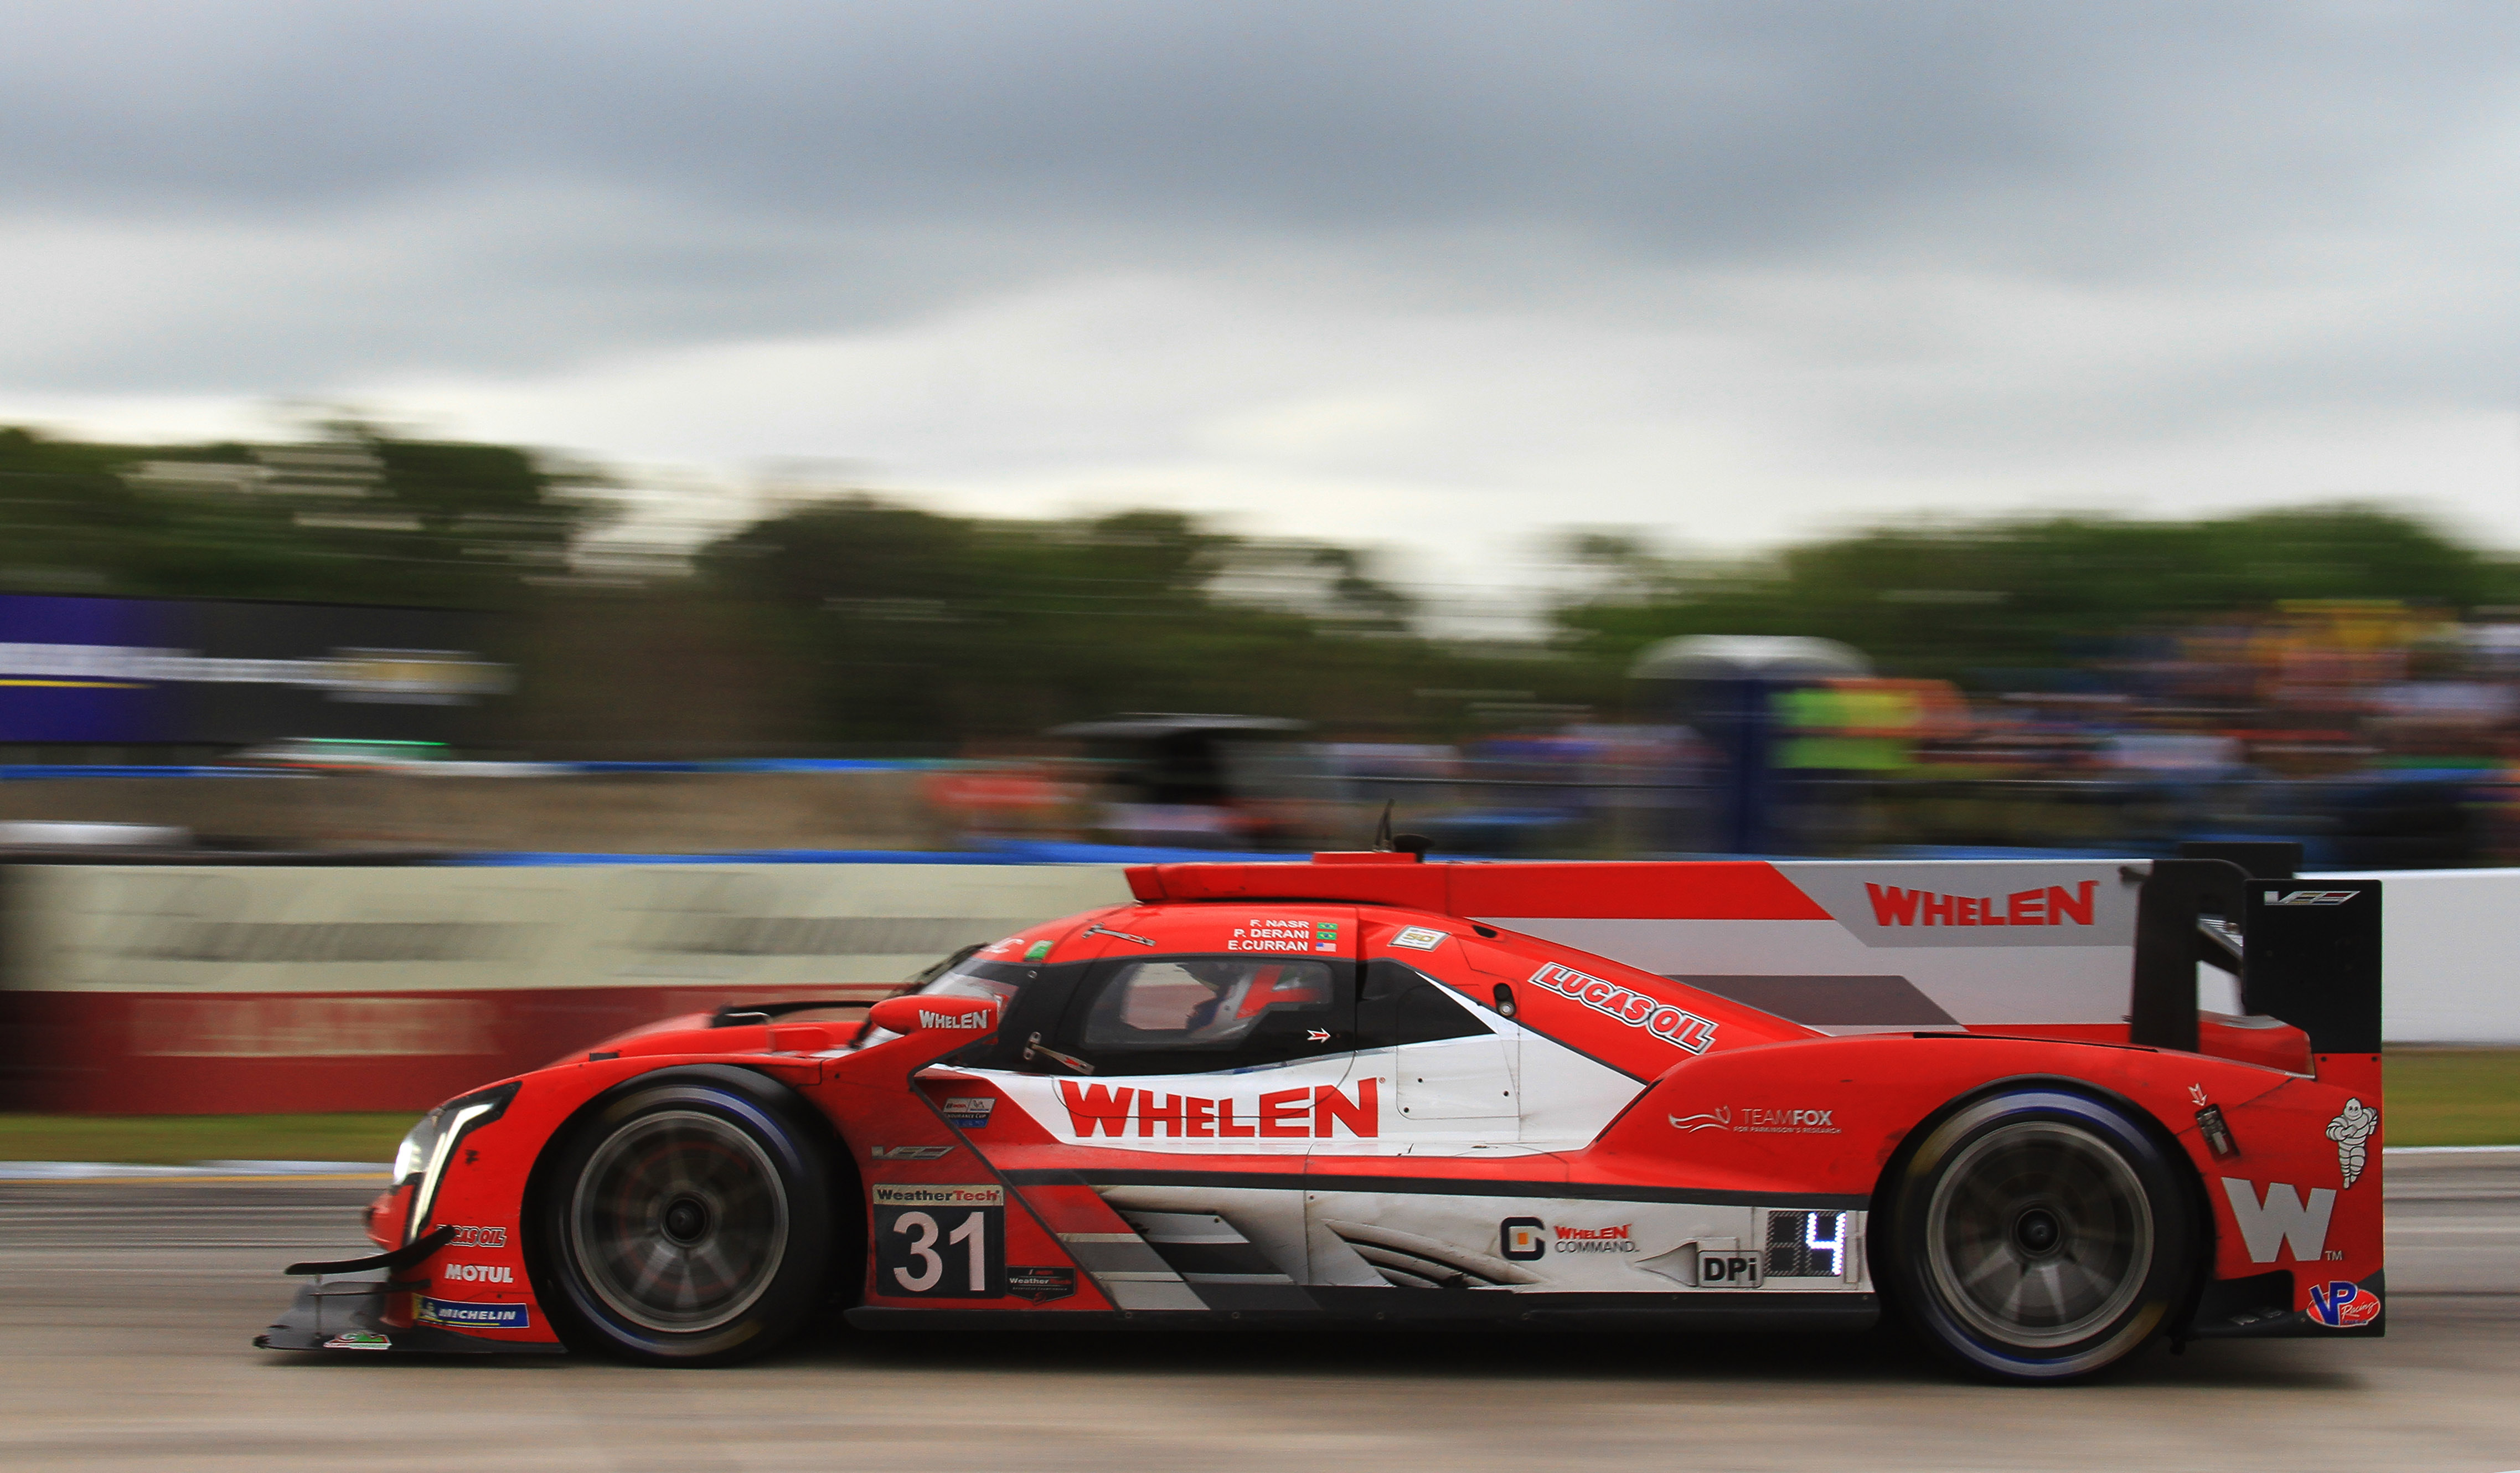 The Whelen Engineering Cadillac was just a little faster than everyone else